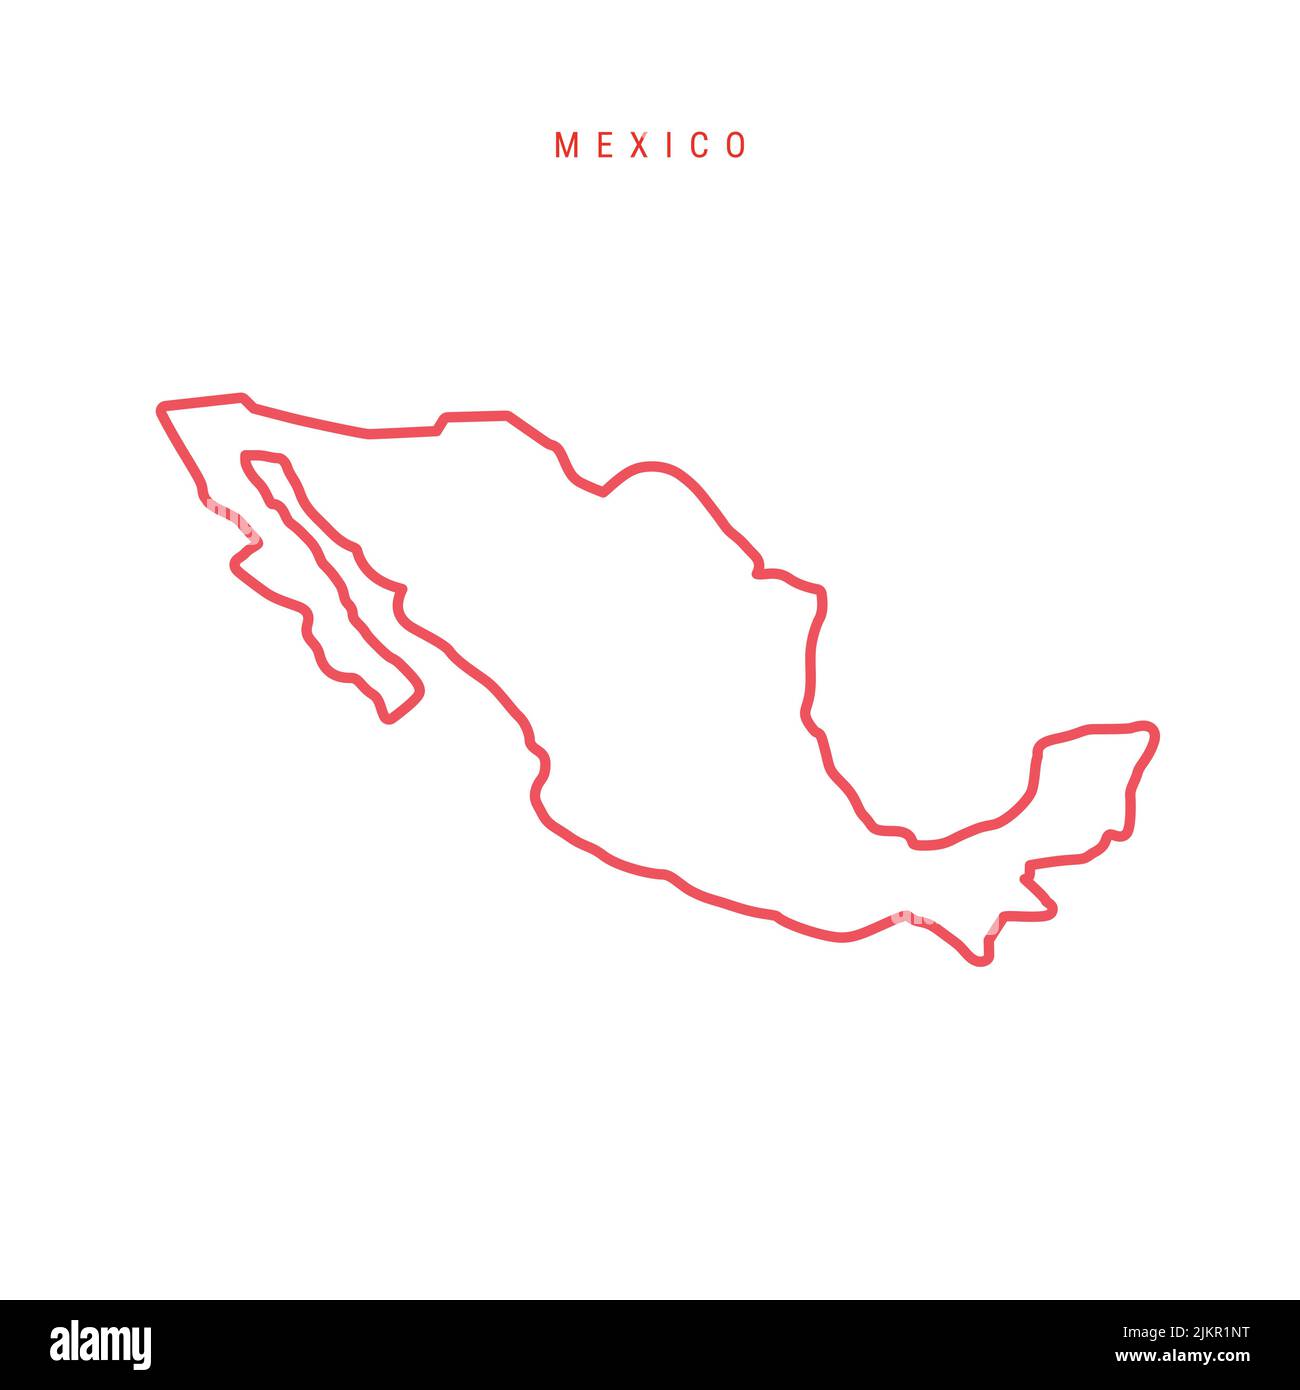 Mexico editable outline map. Mexican red border. Country name. Adjust line weight. Change to any color. Vector illustration. Stock Vector